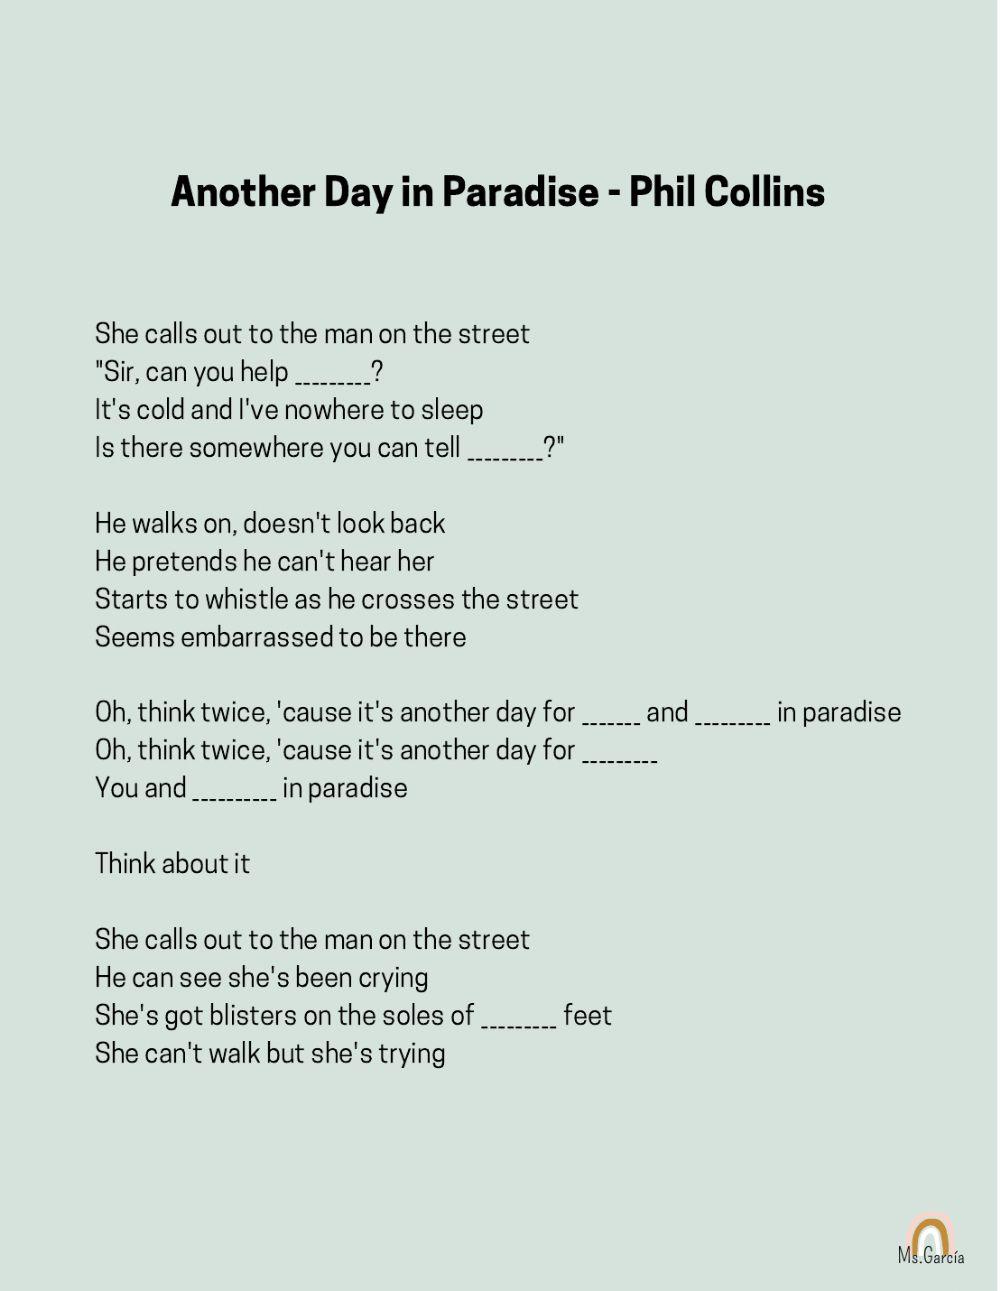 9 Another day in paradise English ESL worksheets pdf & doc